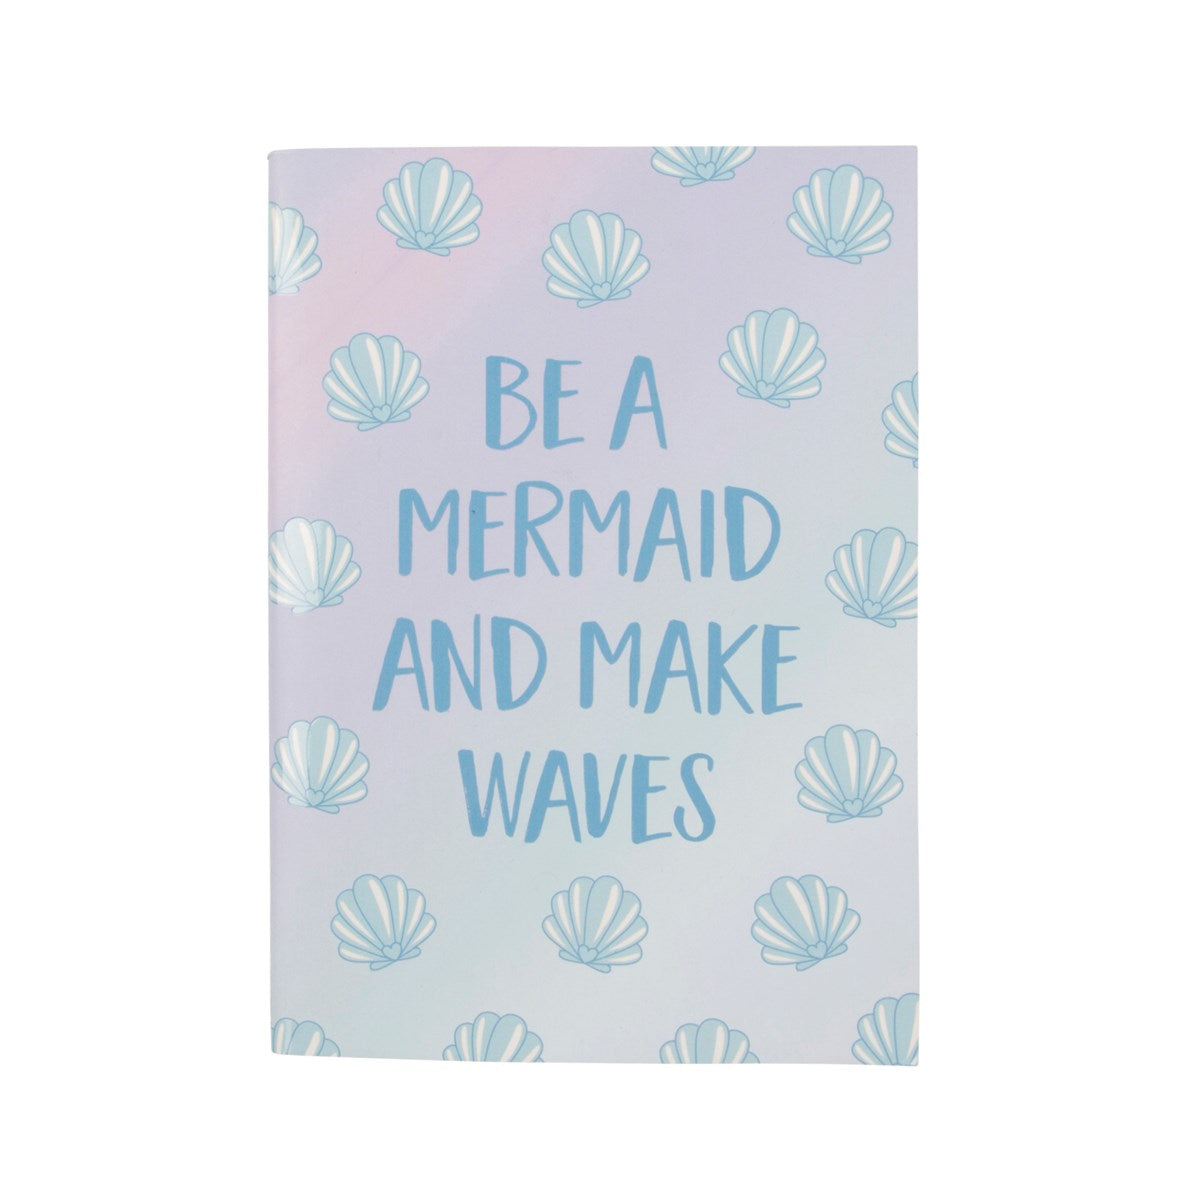 Pretty lilac / blue ombre notebook with shell print and mermaid slogan: Be a mermaid and make waves 